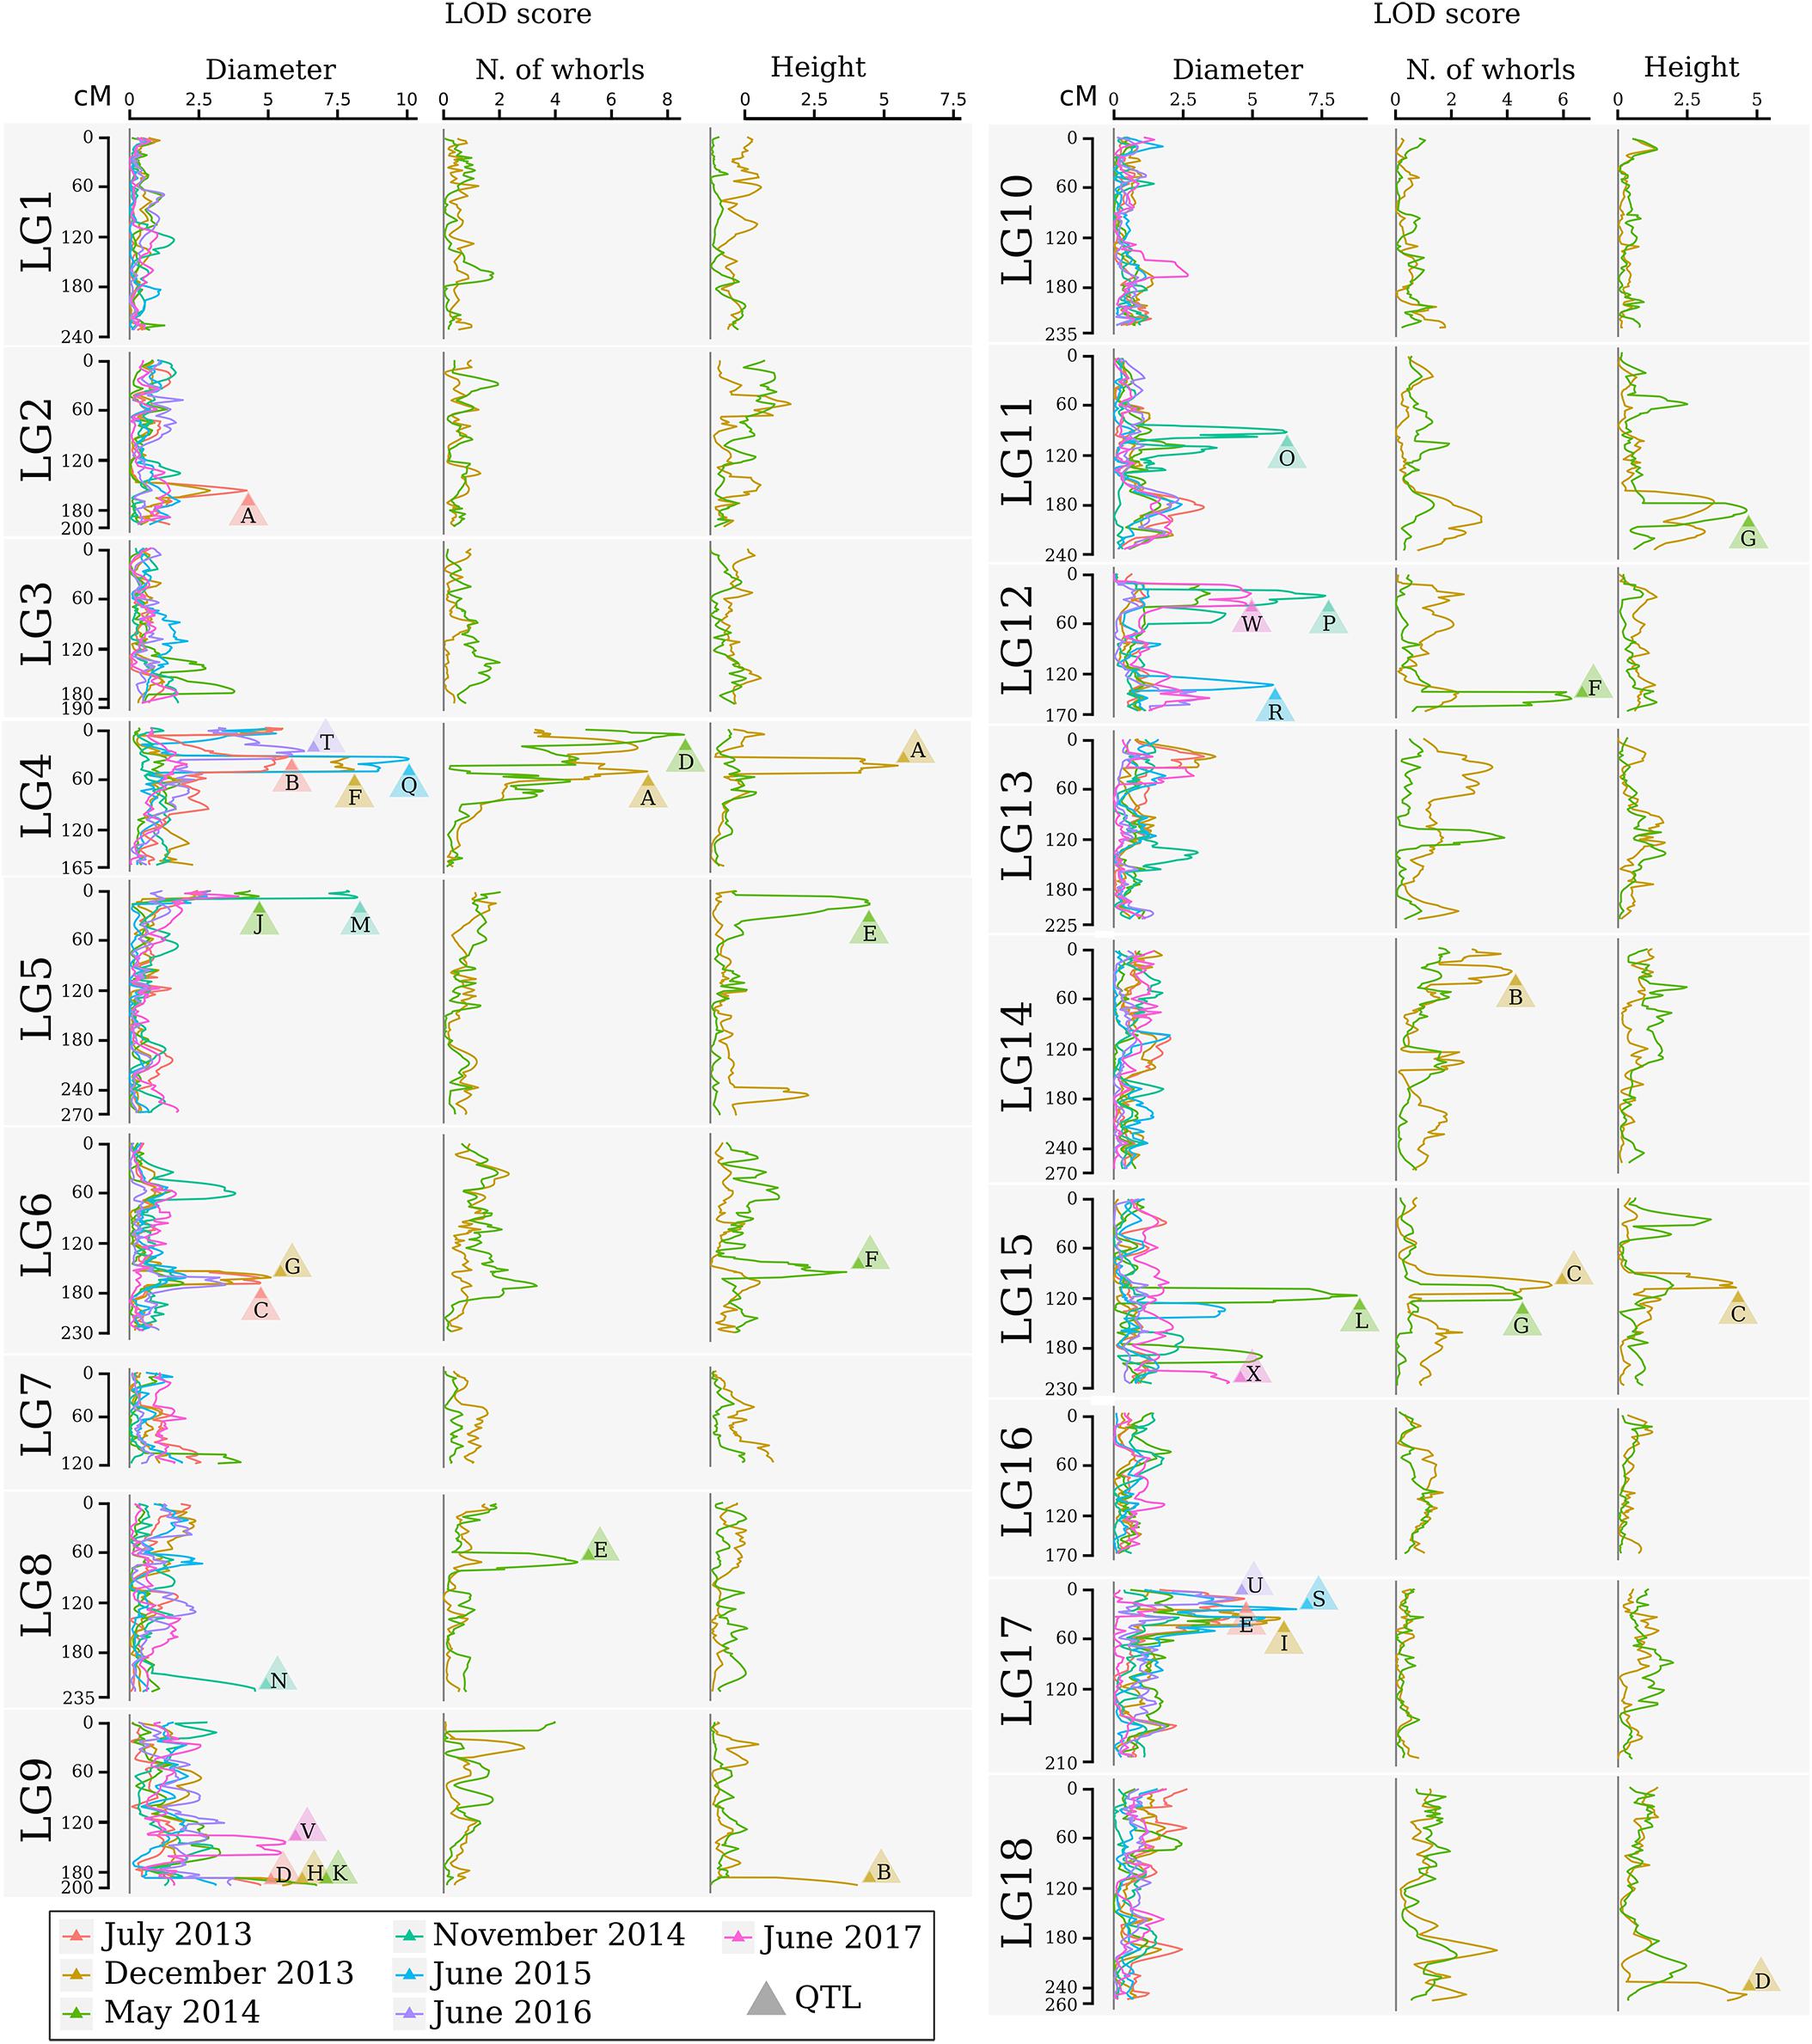 High-resolution genetic map and QTL analysis of growth-related traits of Hevea brasiliensis cultivated under suboptimal temperature and humidity conditions